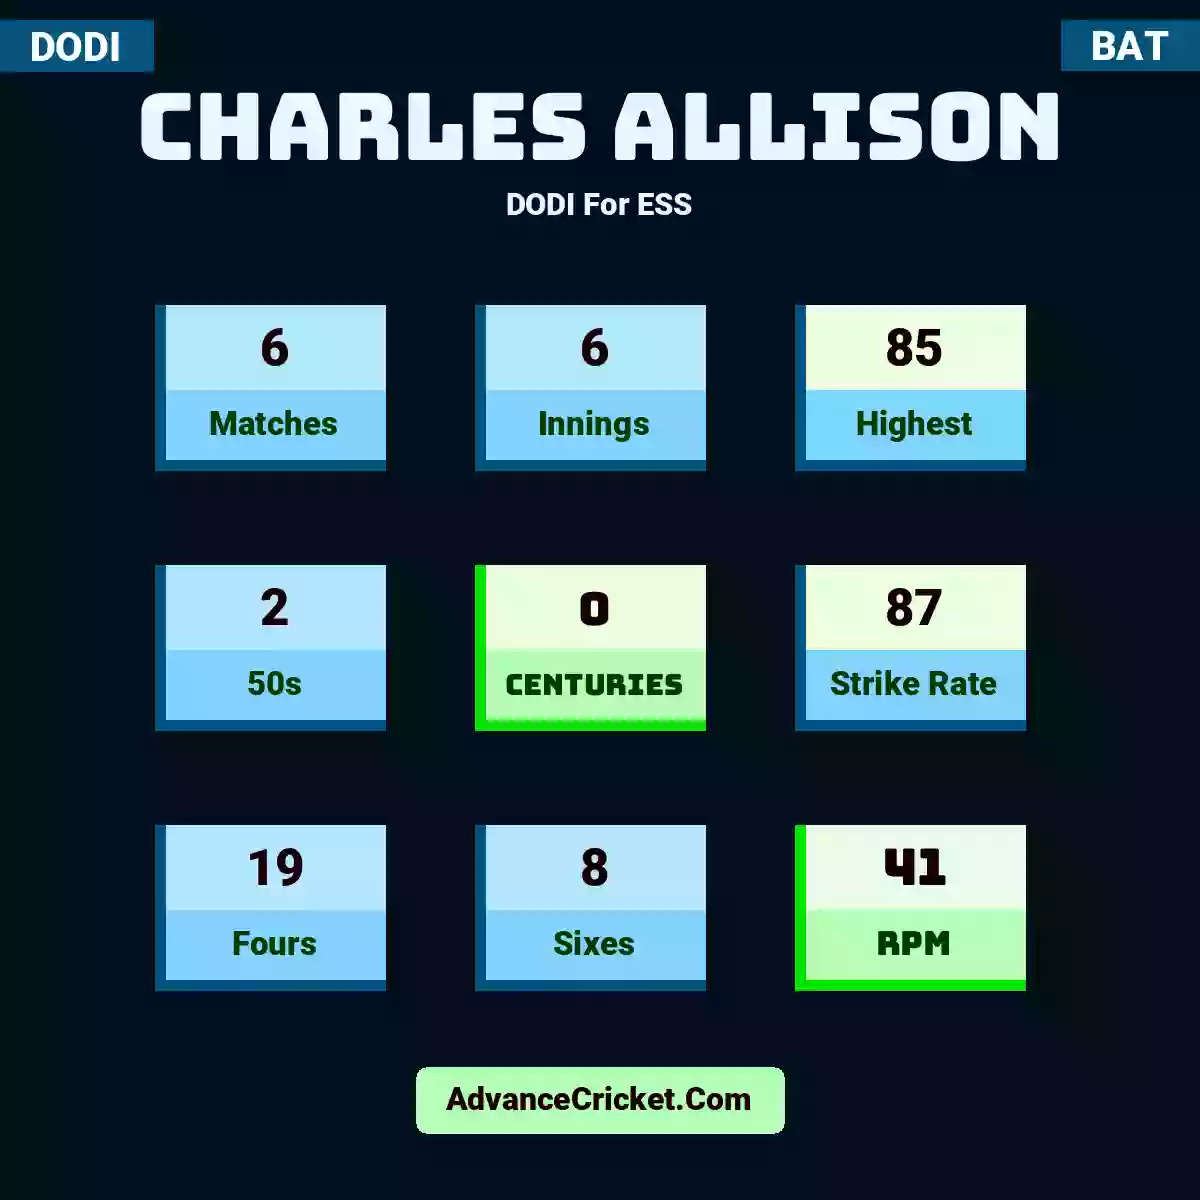 Charles Allison DODI  For ESS, Charles Allison played 6 matches, scored 85 runs as highest, 2 half-centuries, and 0 centuries, with a strike rate of 87. C.Allison hit 19 fours and 8 sixes, with an RPM of 41.